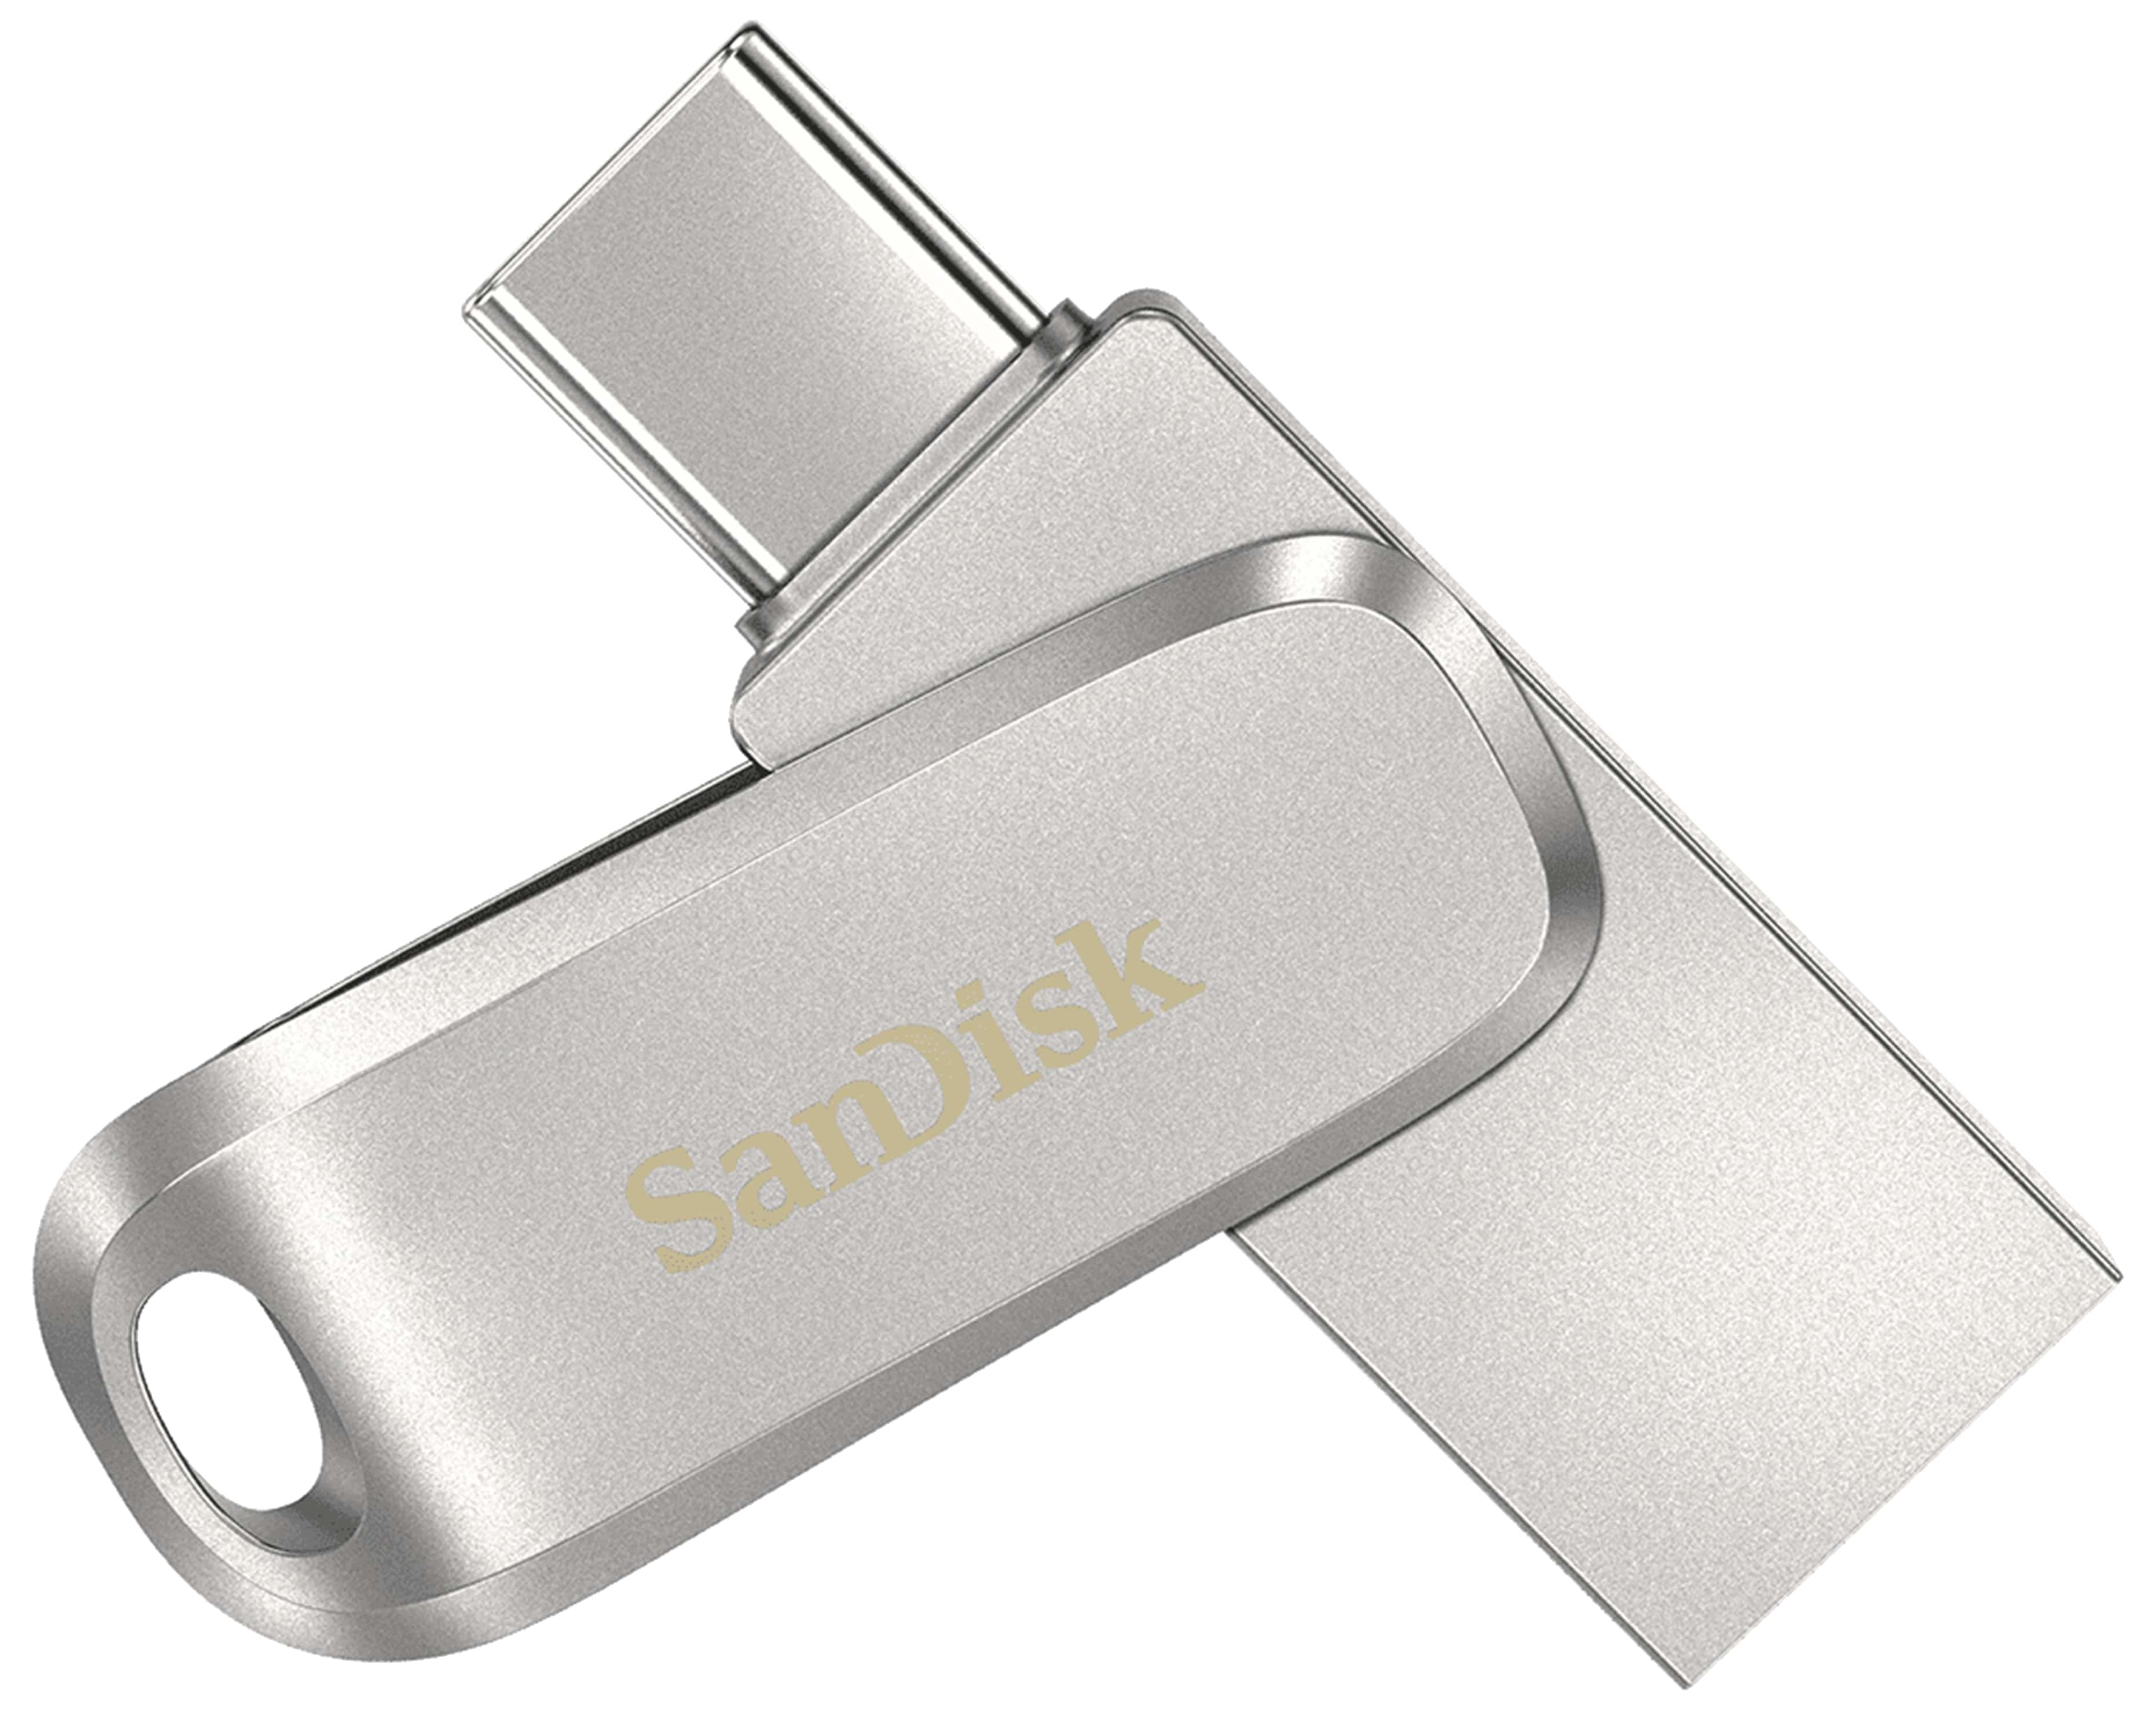 SANDISK USB Stick Ultra Dual Drive Luxe 32GB